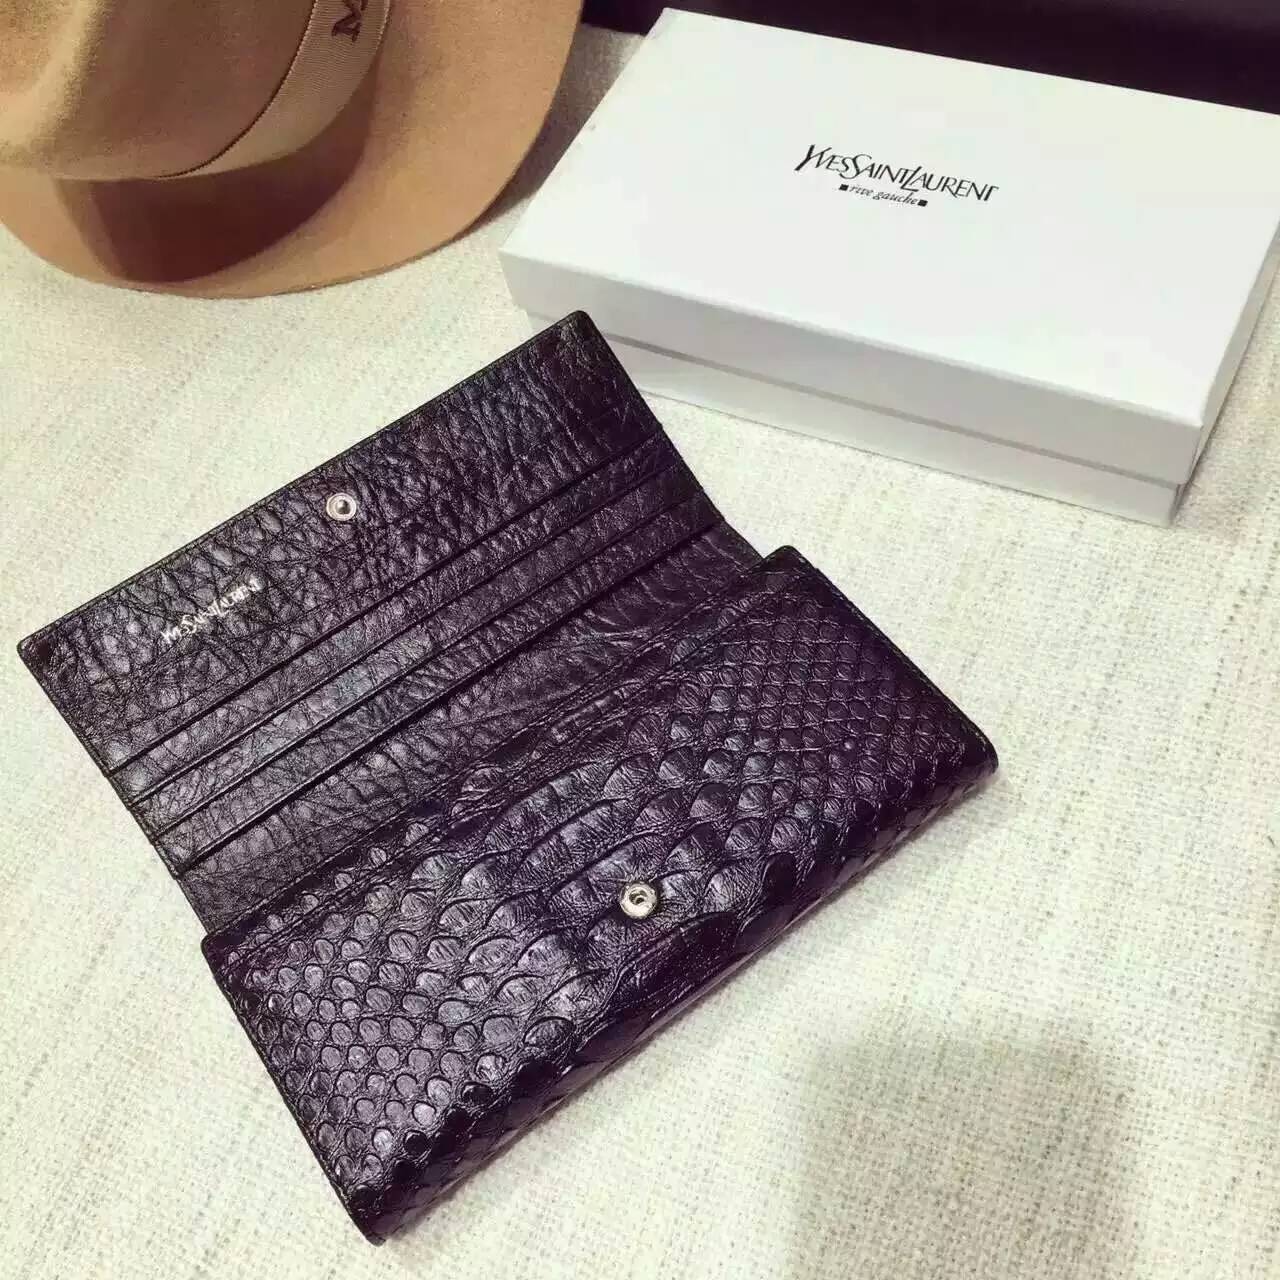 Limited Edition!2016 New Saint Laurent Small Leather Goods Cheap Sale-Saint Laurent Clutch in Black Python Embossed Leather - Click Image to Close